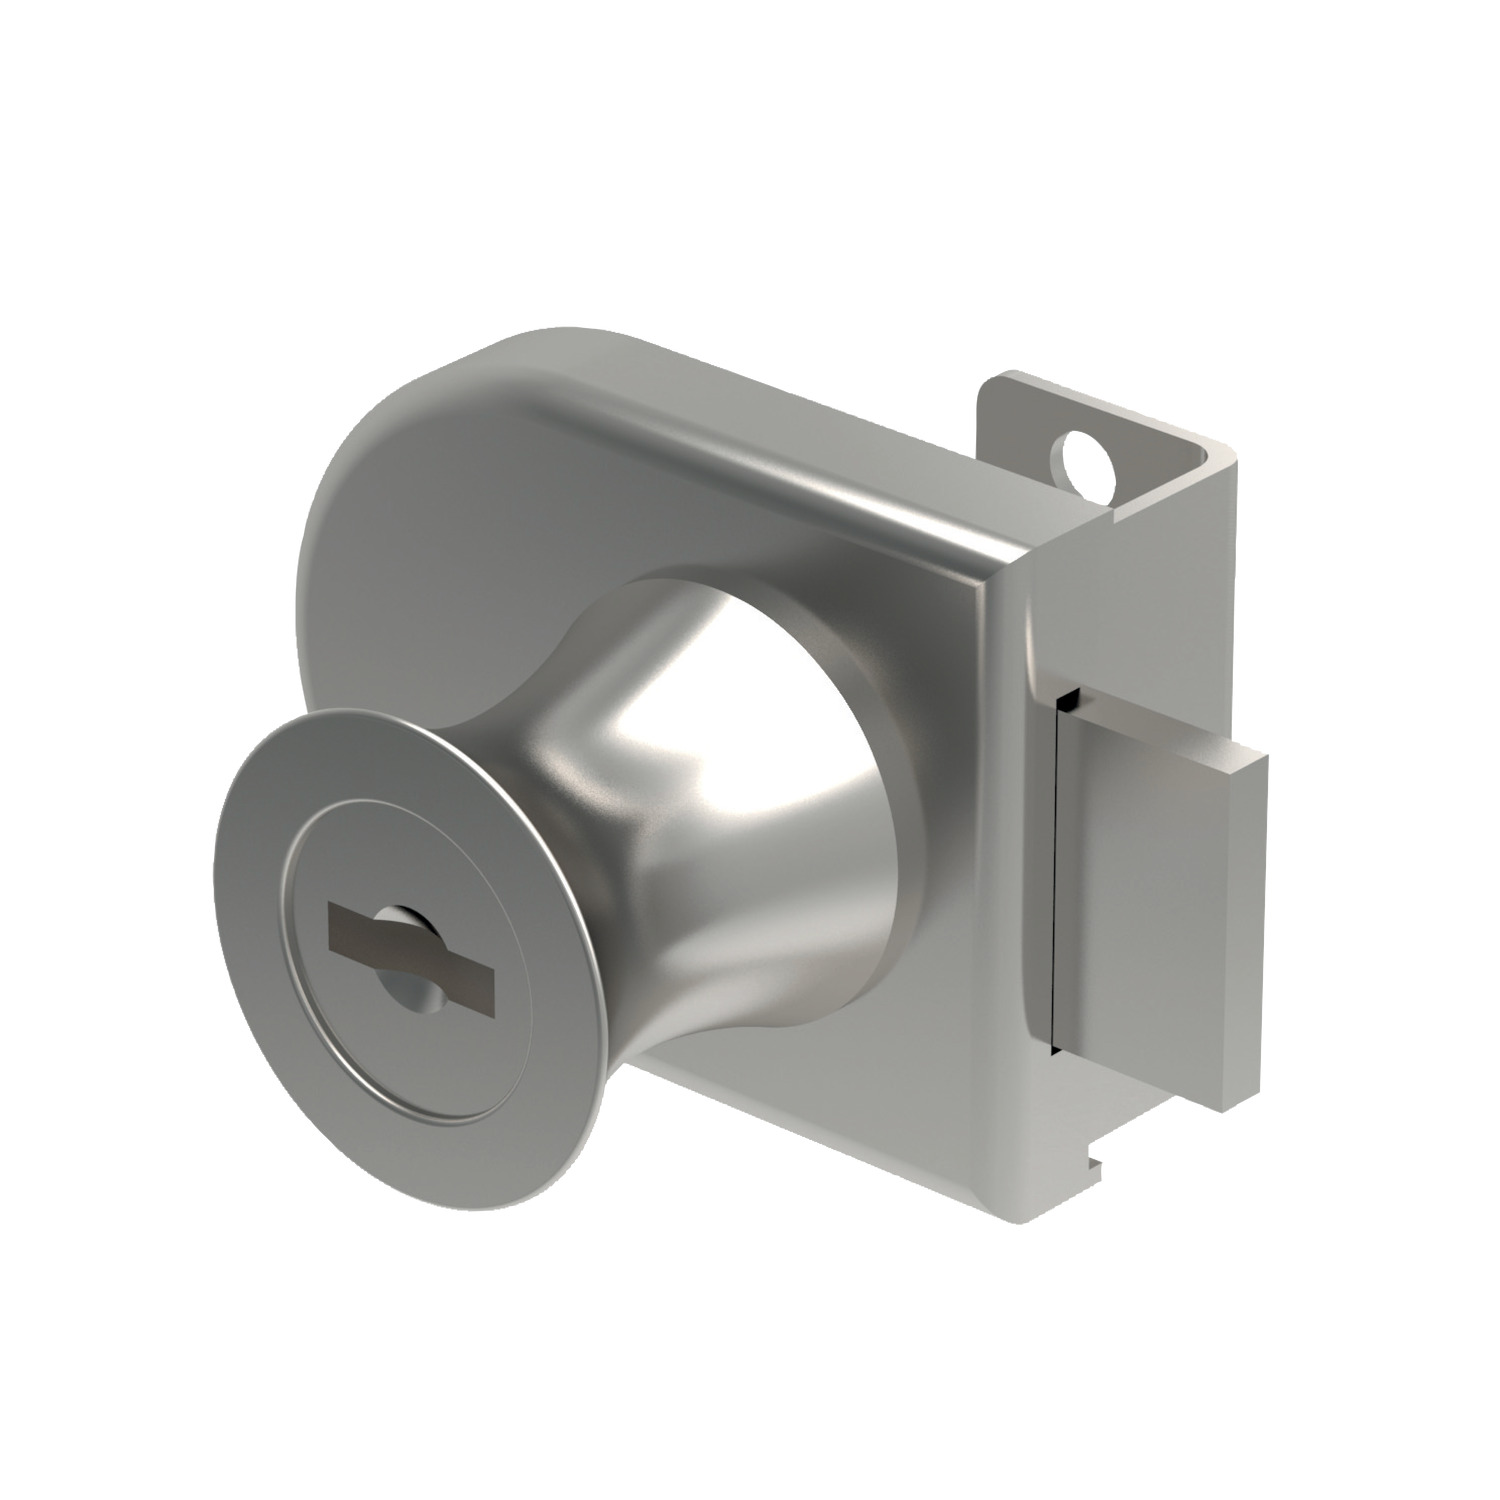 Glass Door Lock Cylinder locks suitable for glass doors, supplied with catch plate. Easy instalaltion by clamping to edge with grub screw. Suitable for 4 - 8 mm thicknesses.